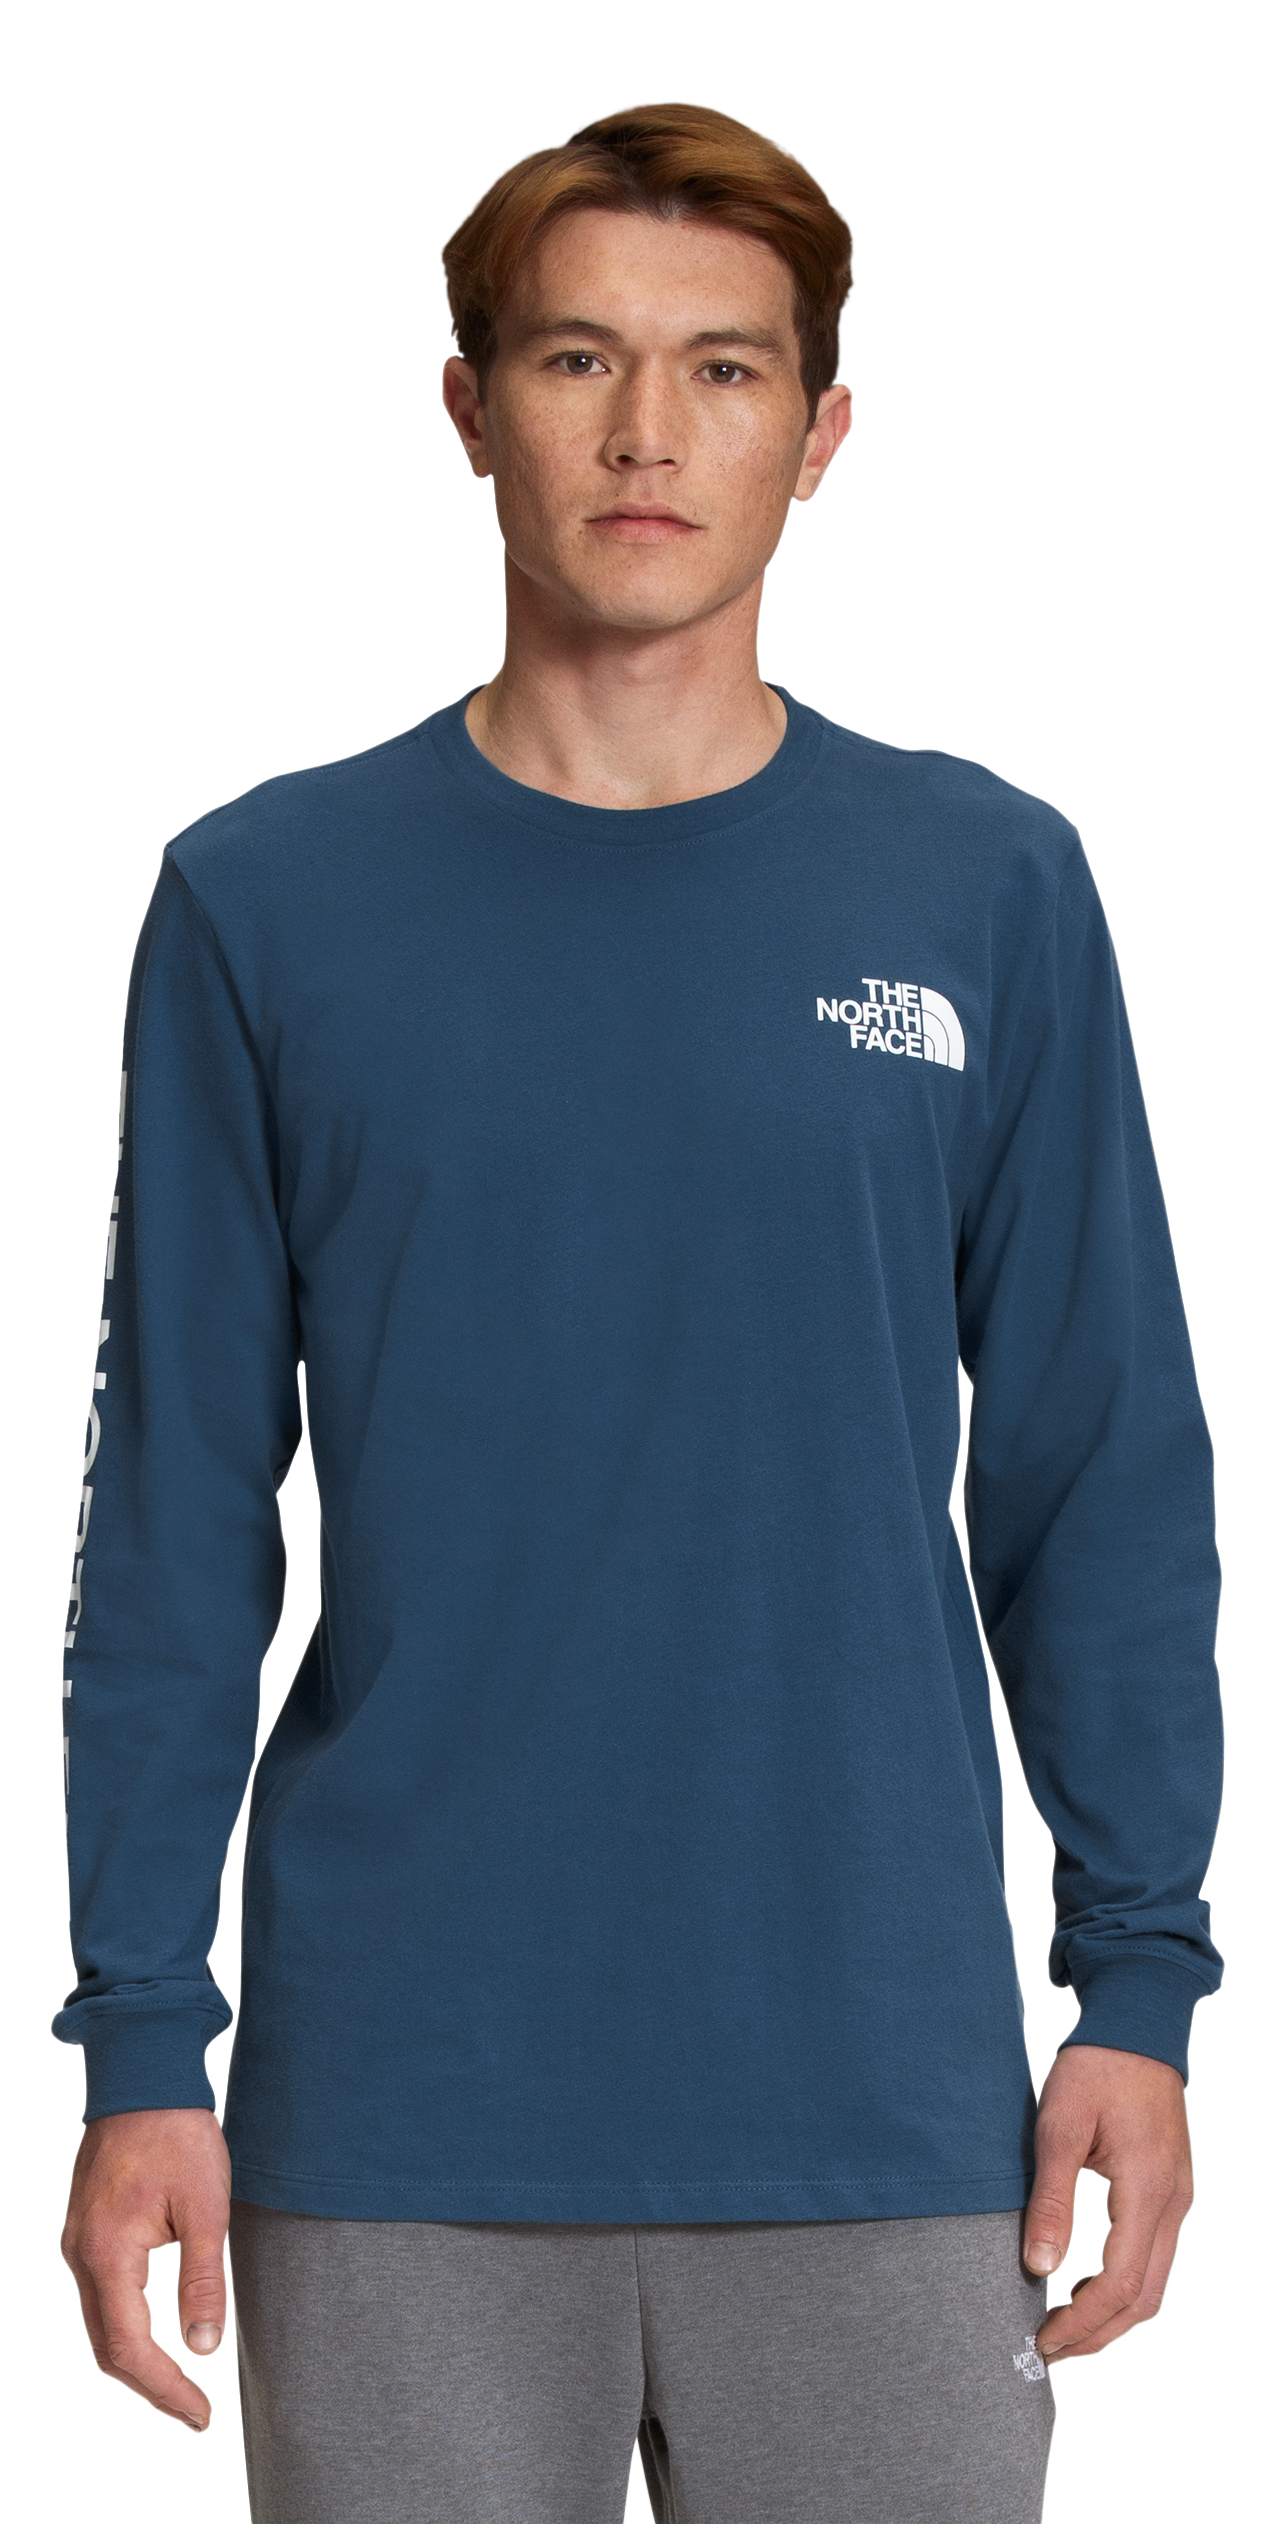 The North Face TNF Sleeve Hit Long-Sleeve T-Shirt for Men - shady Blue/TNF White - XL